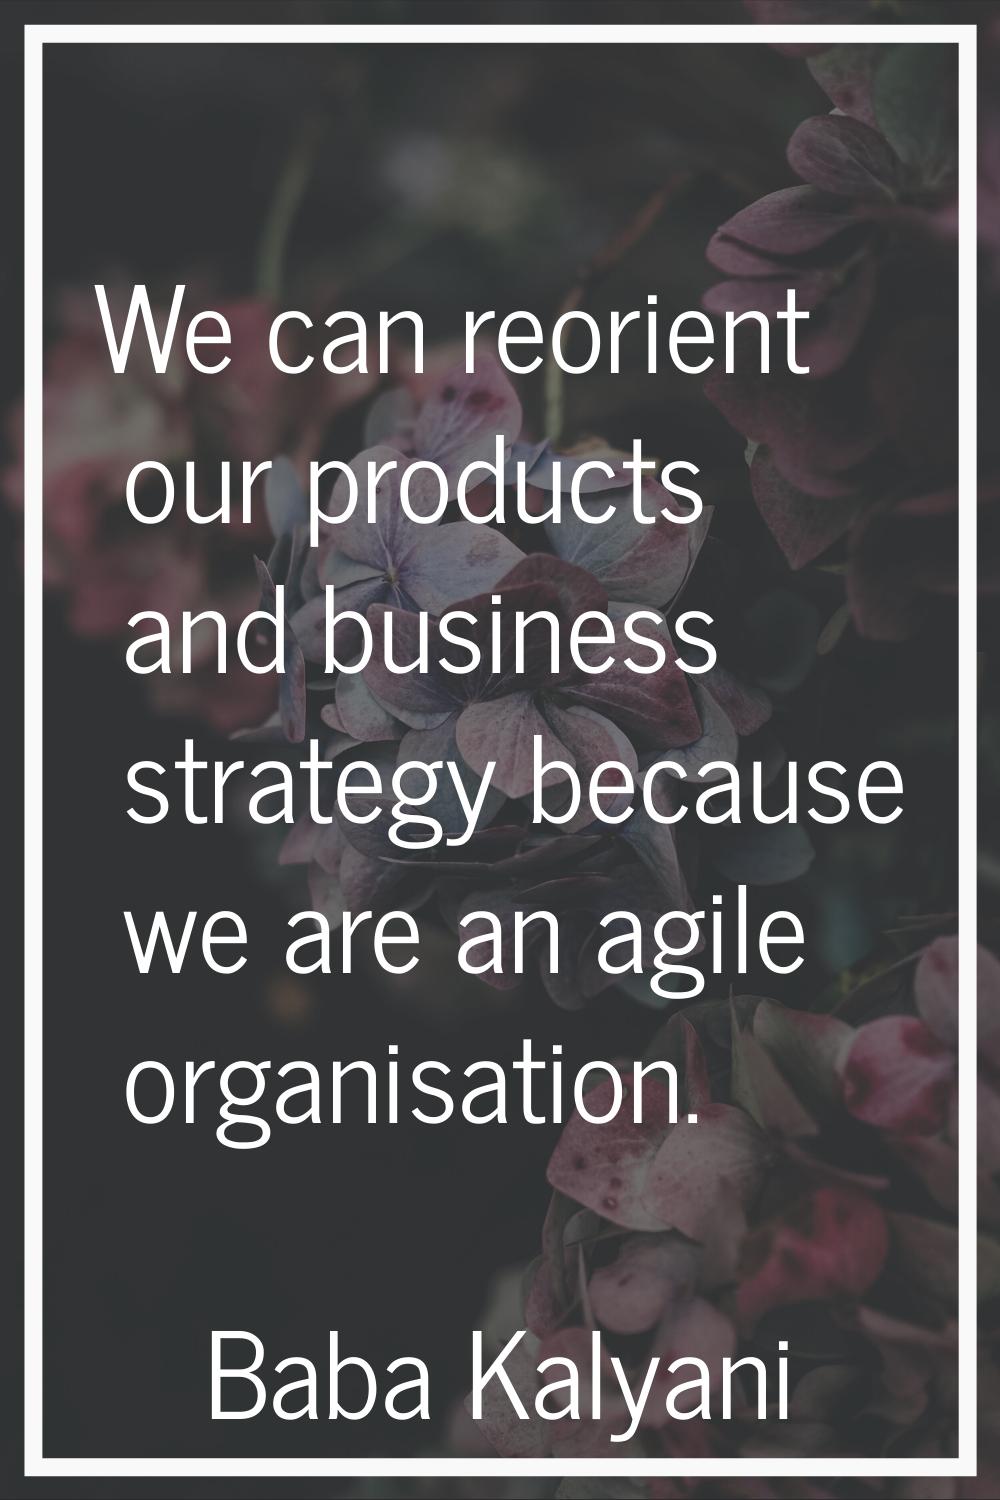 We can reorient our products and business strategy because we are an agile organisation.